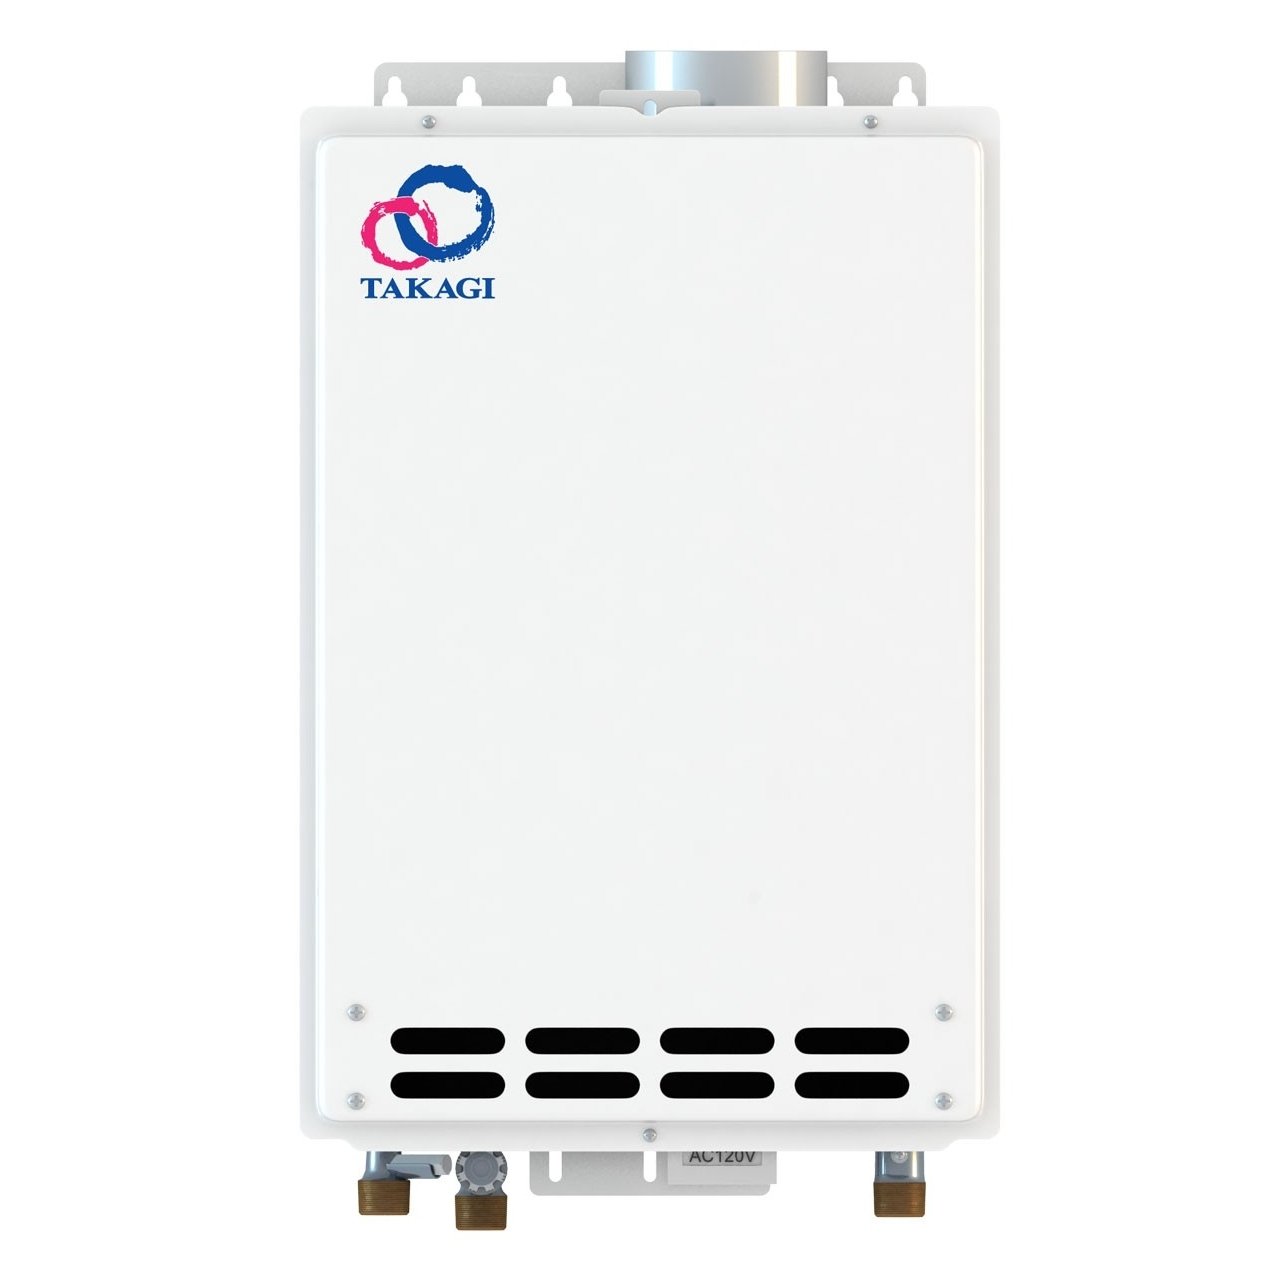 Benefits of the Tankless Gas Water Heater